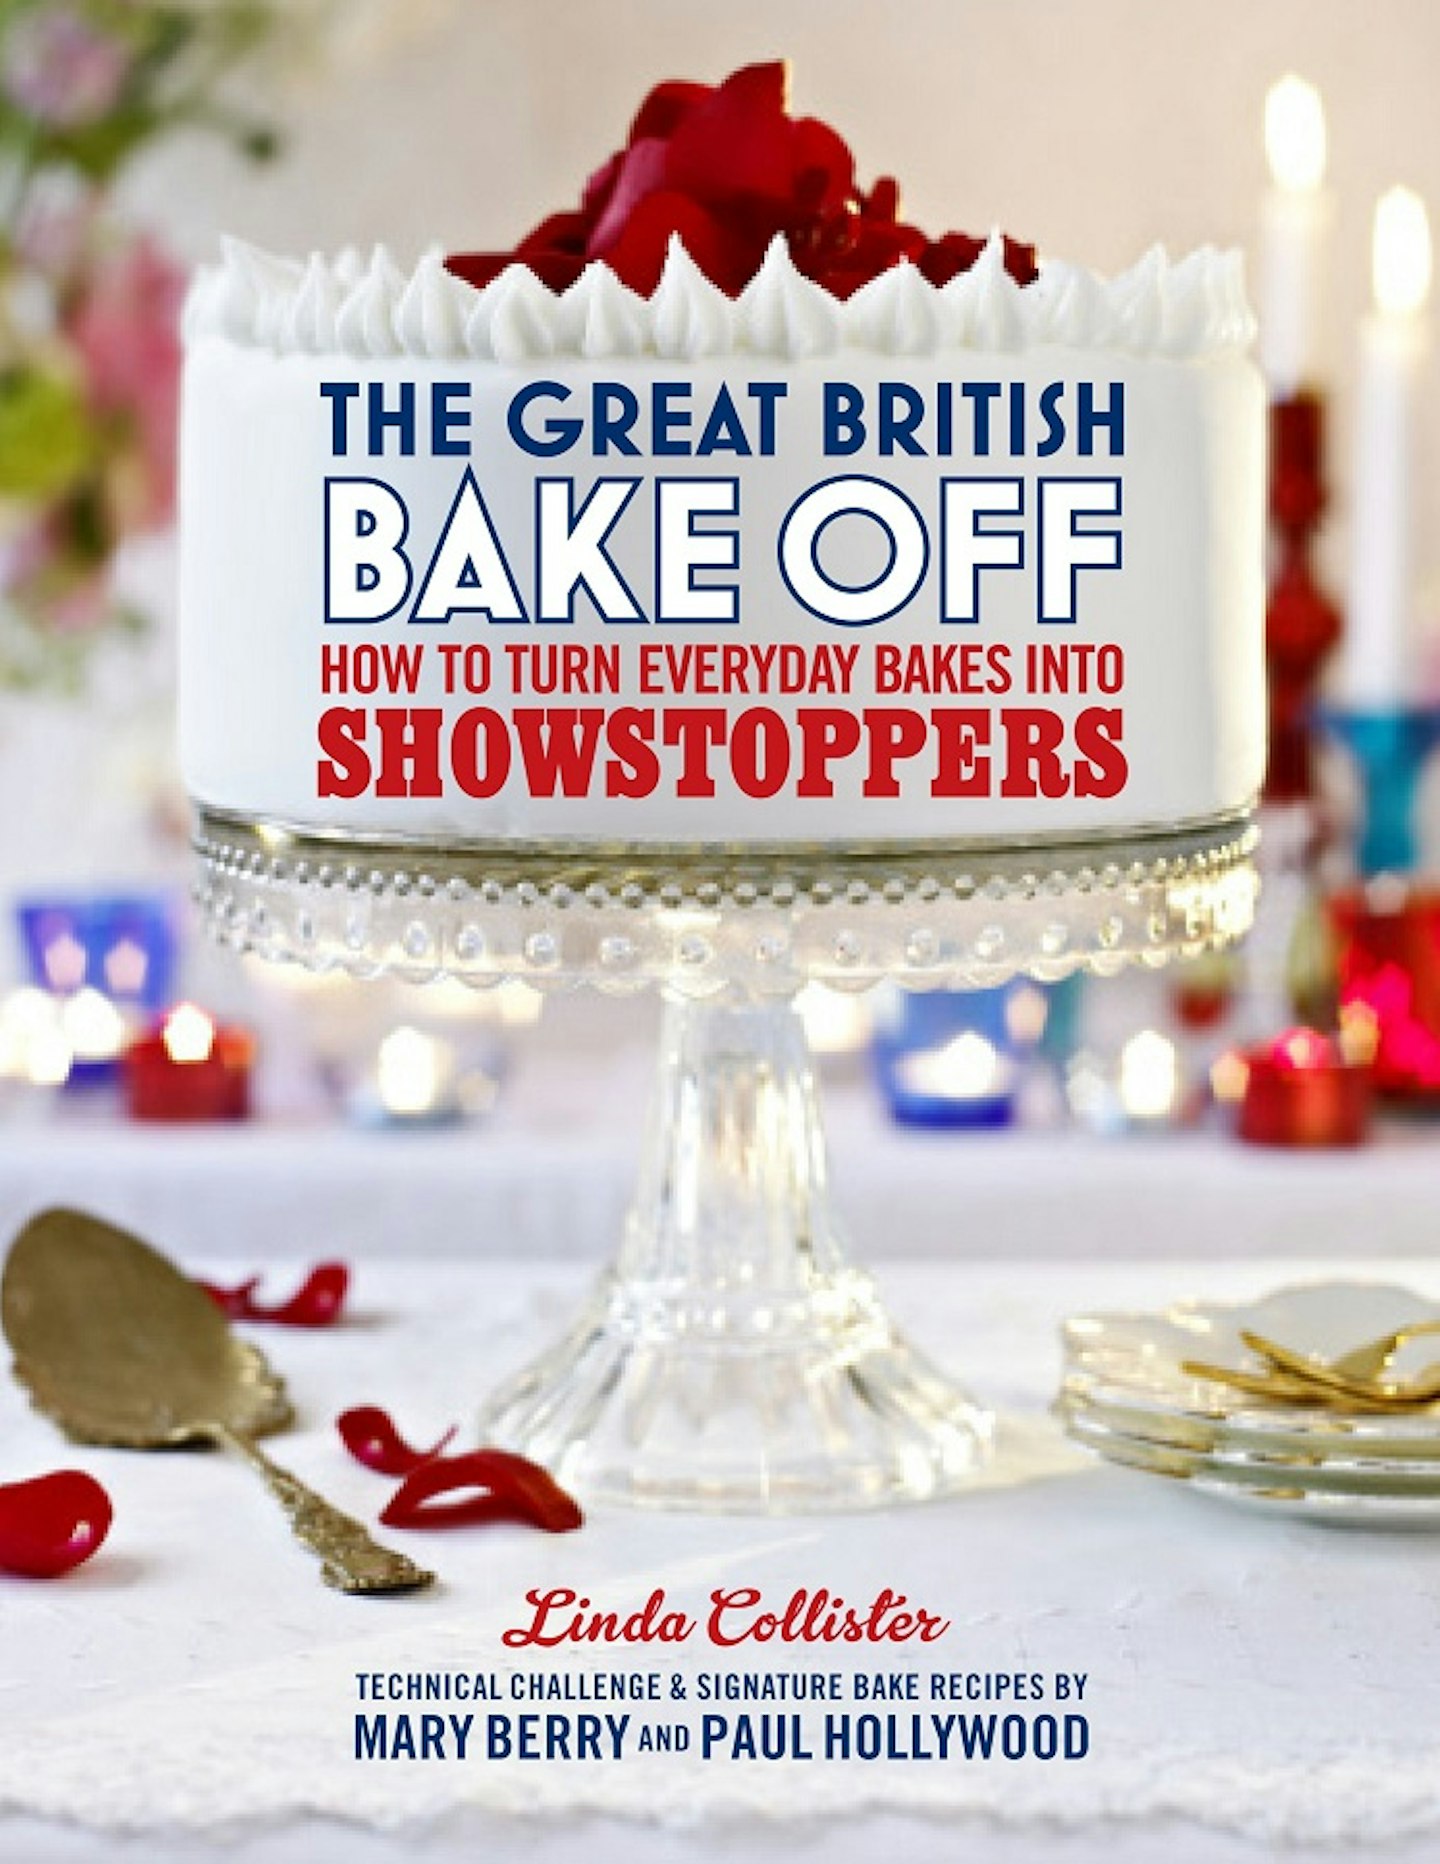 The Great British Bake Off: How to turn everyday bakes into showstoppers, 17.99